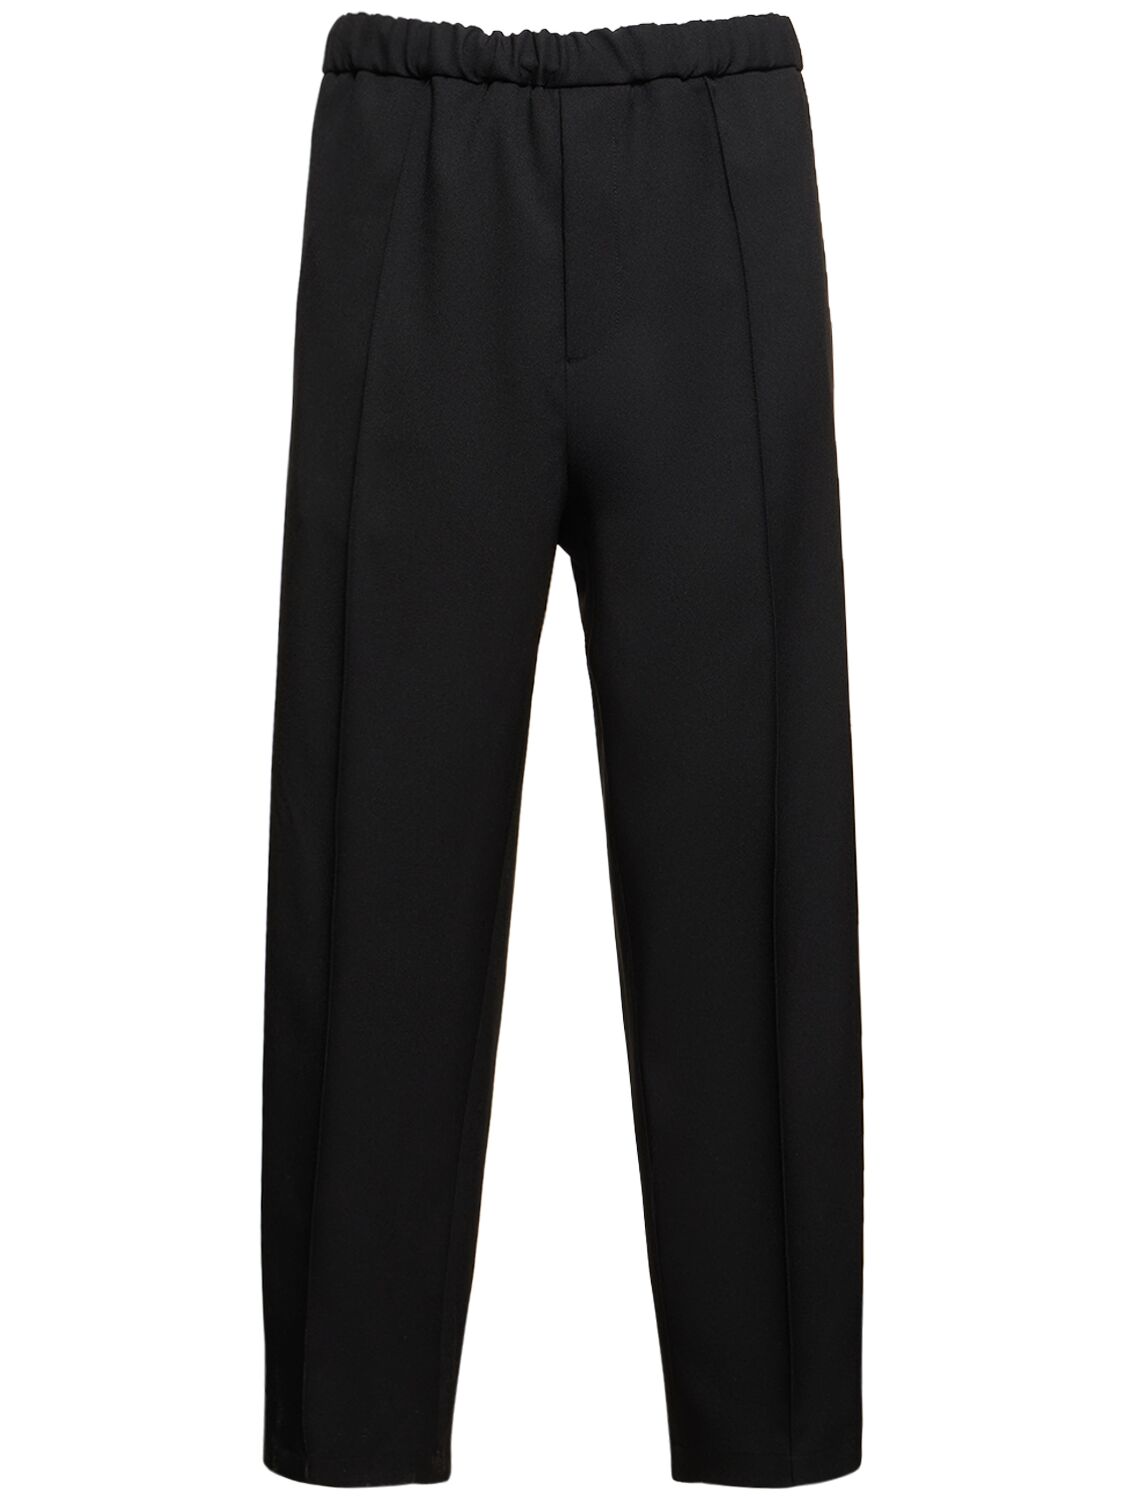 Image of Relaxed Fit Cropped Leg Pants